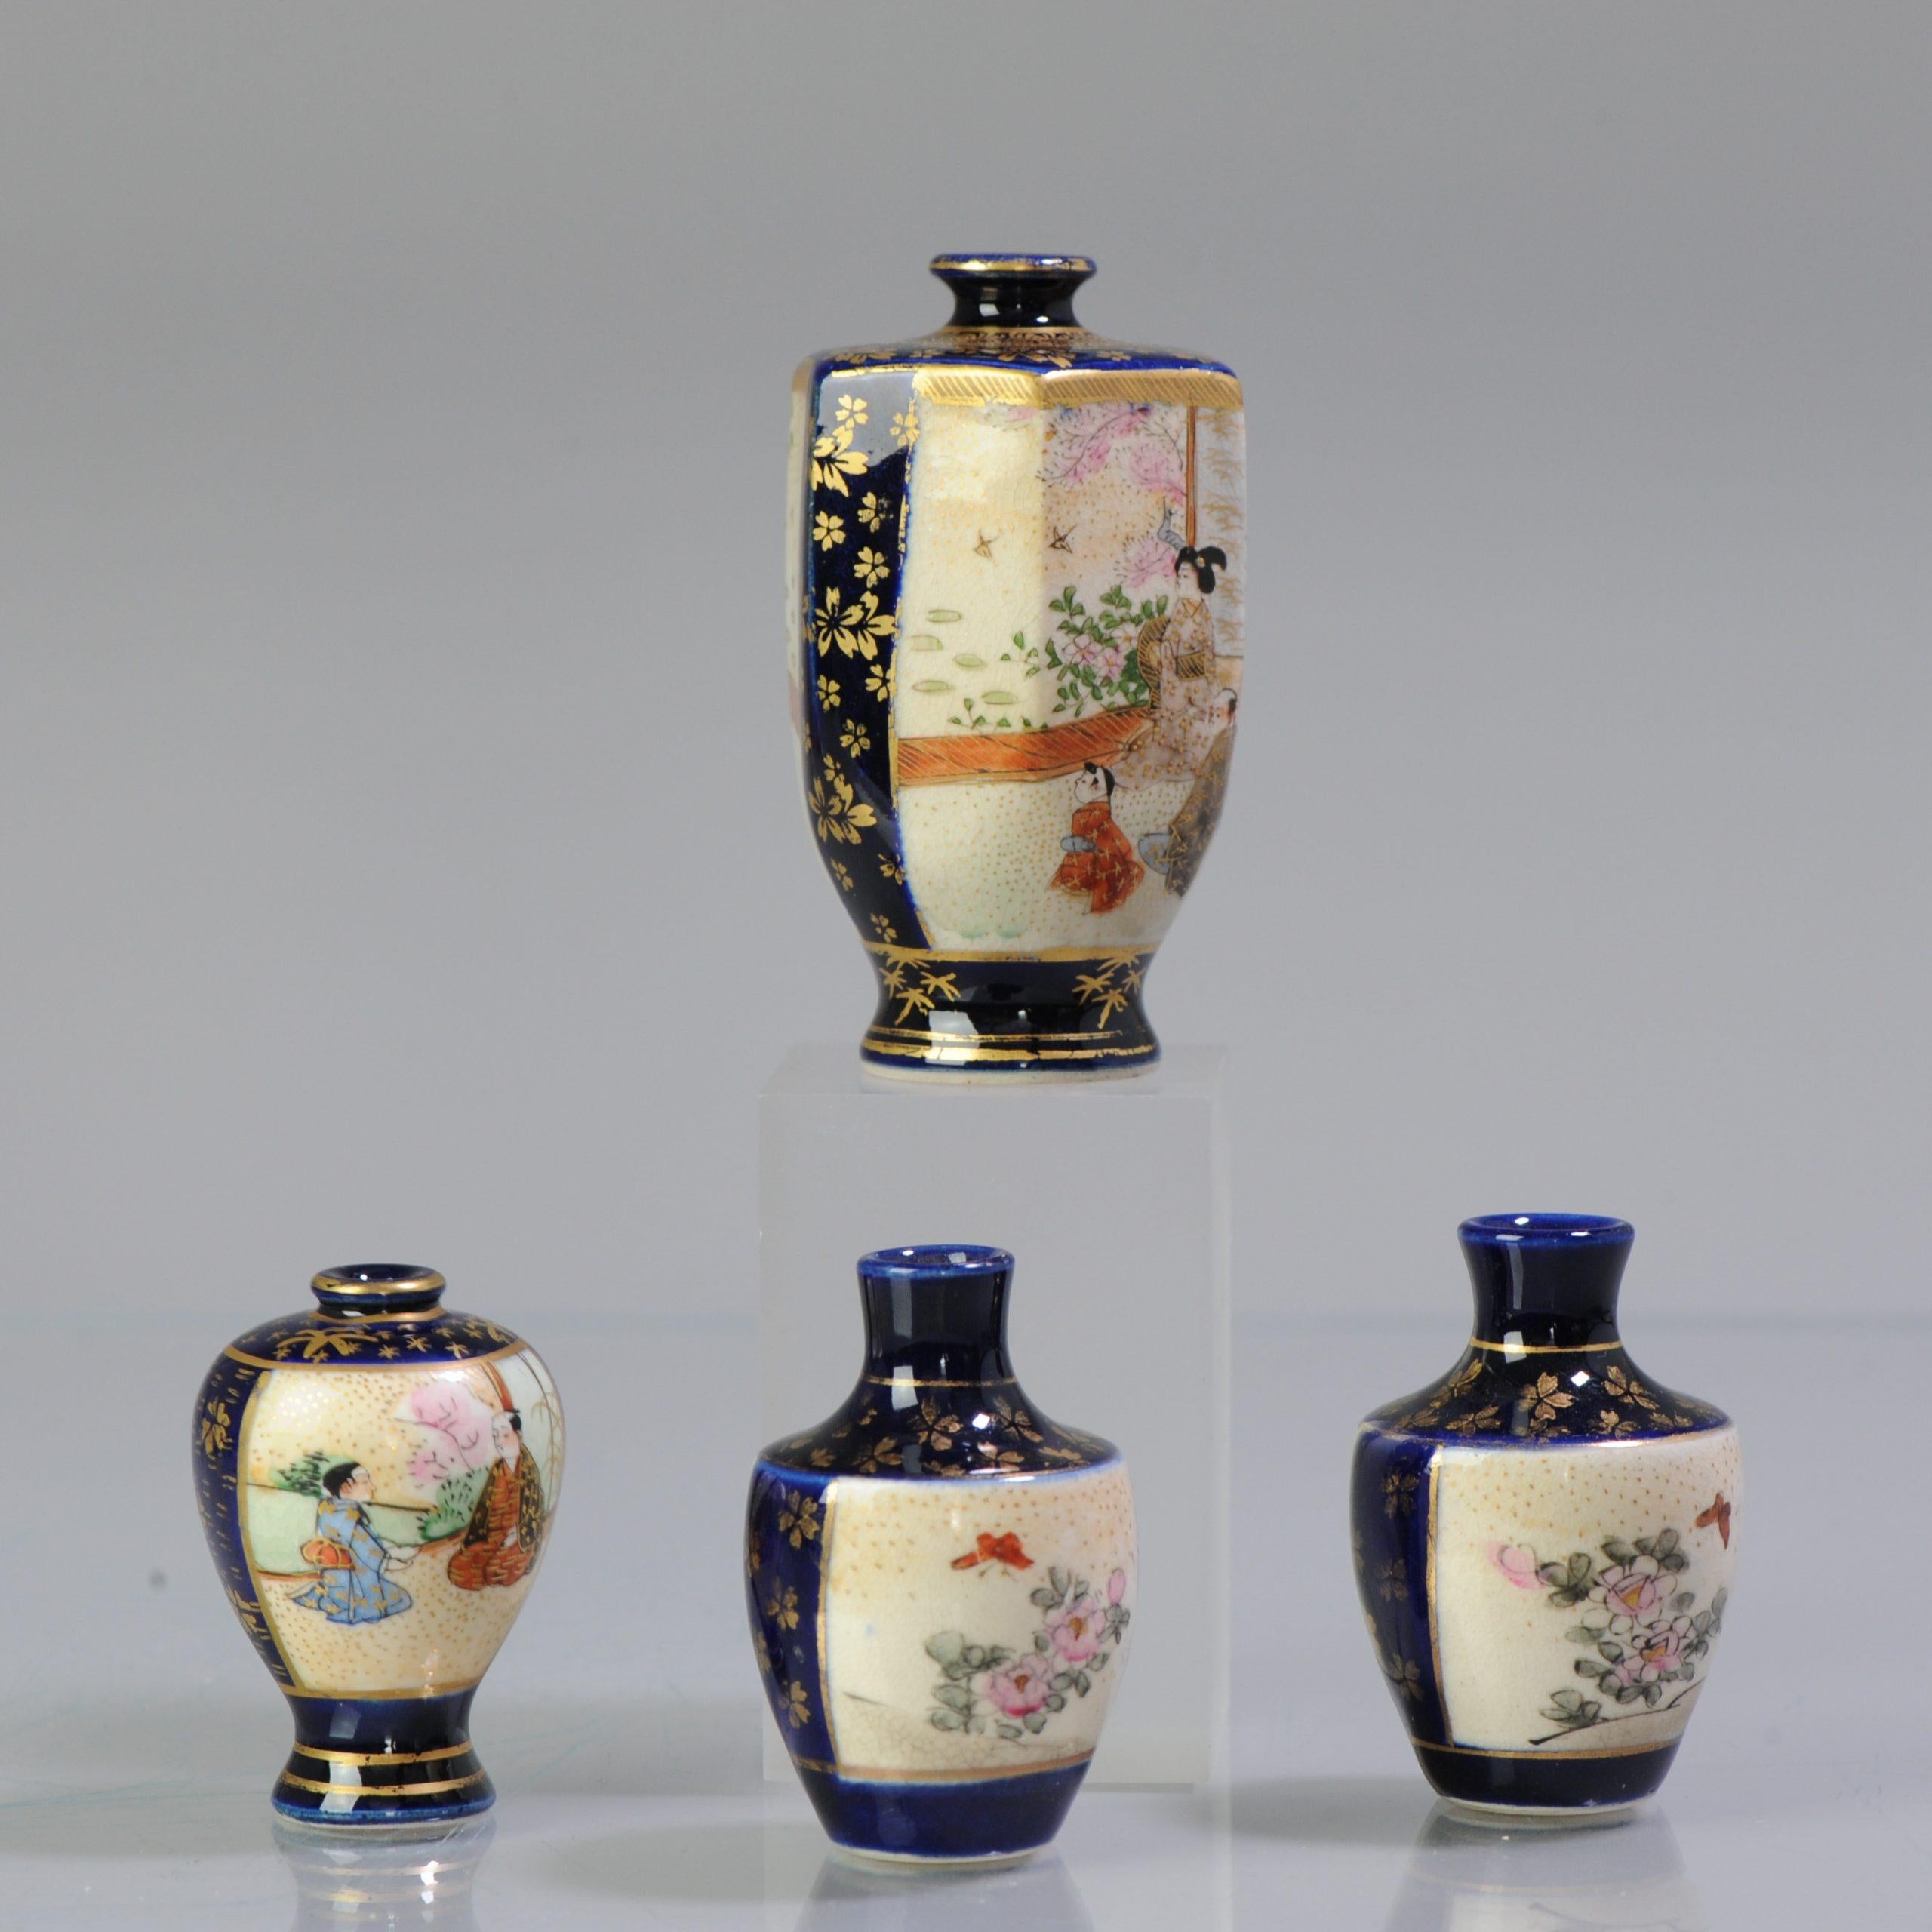 Description
A group of Japanese Satsuma Kyo Satsuma vases, Meiji period
Decorated with figures at various pursuits in landscapes/pagodes within dark blue and gilt